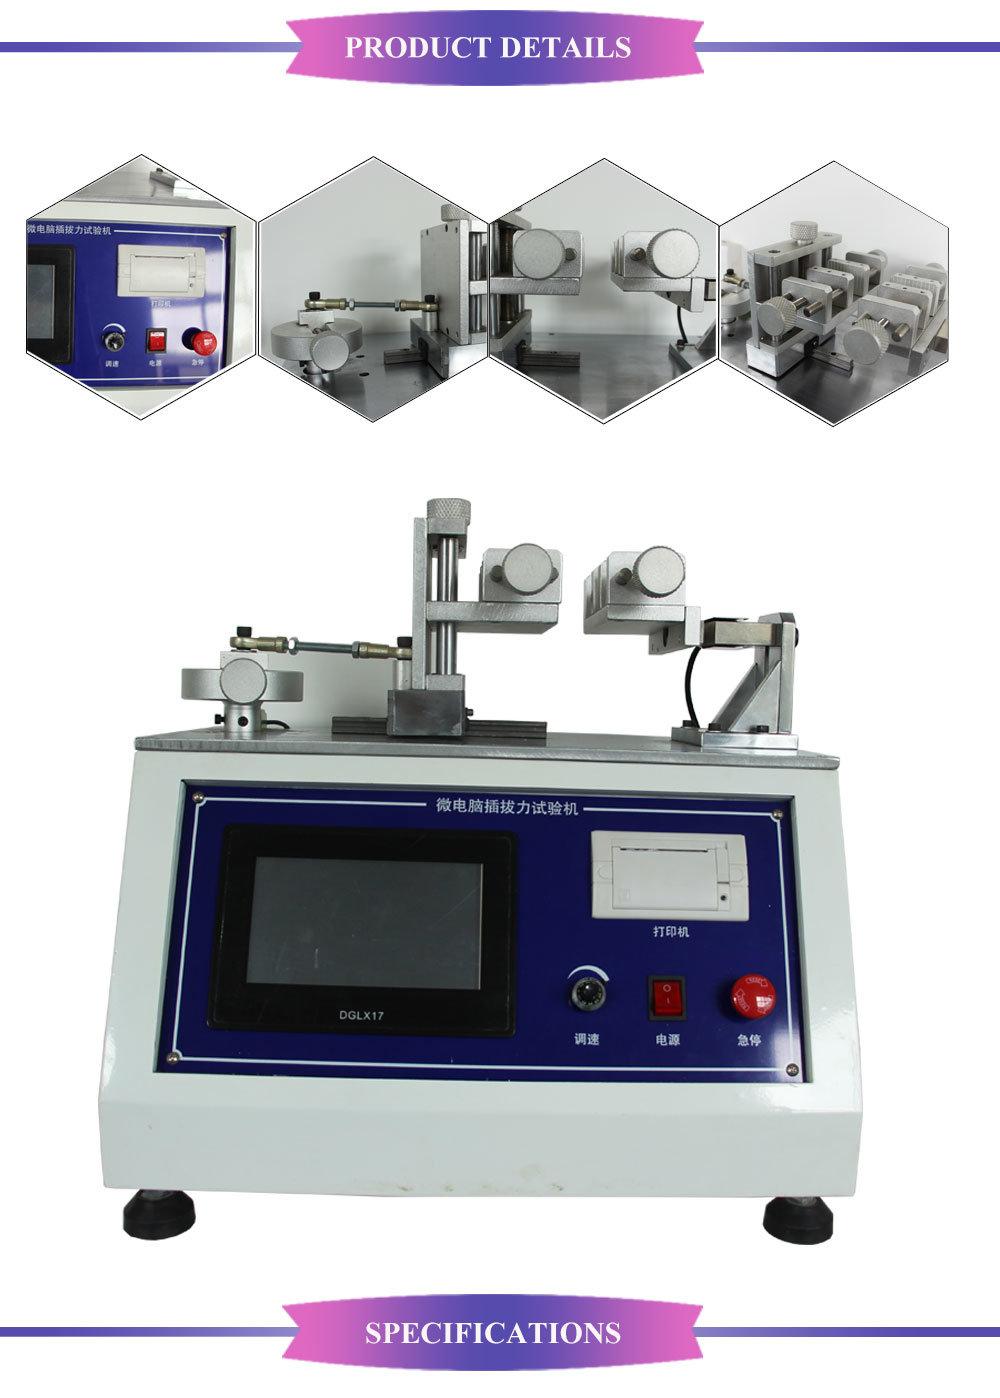 Microcomputer Insertion and Extraction Force Plastic Packaging Material Testing Machine